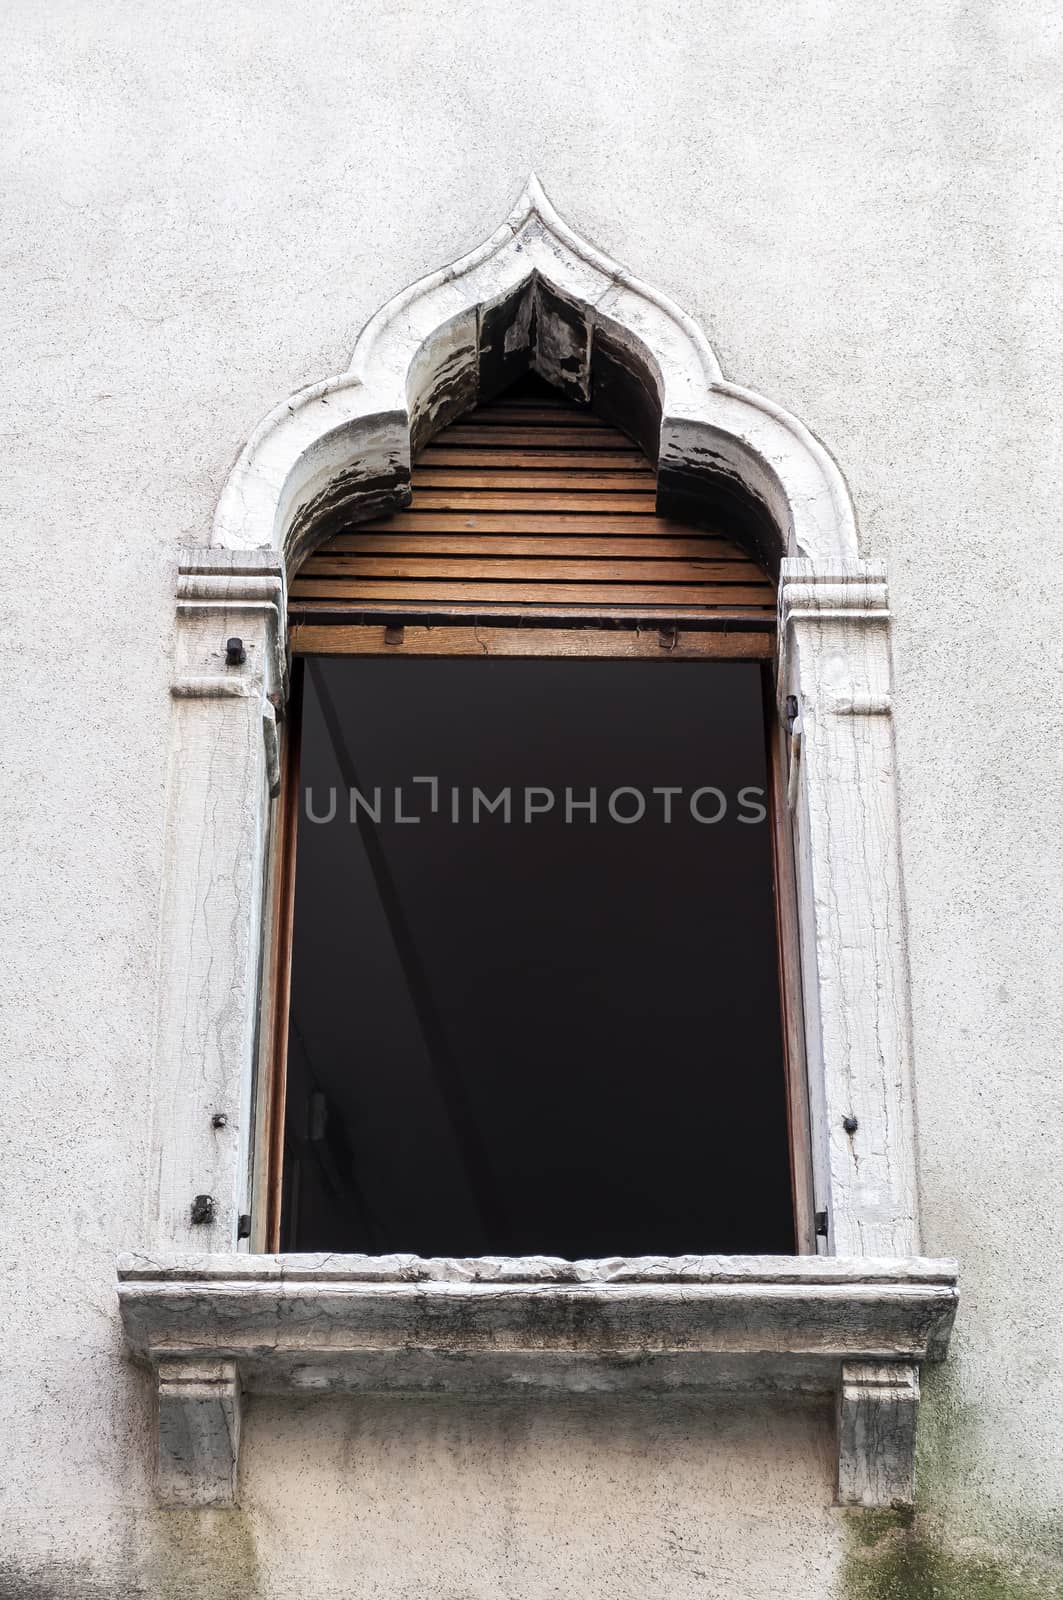 Detail of Venetian architecture. Typical window in Venice, Italy.